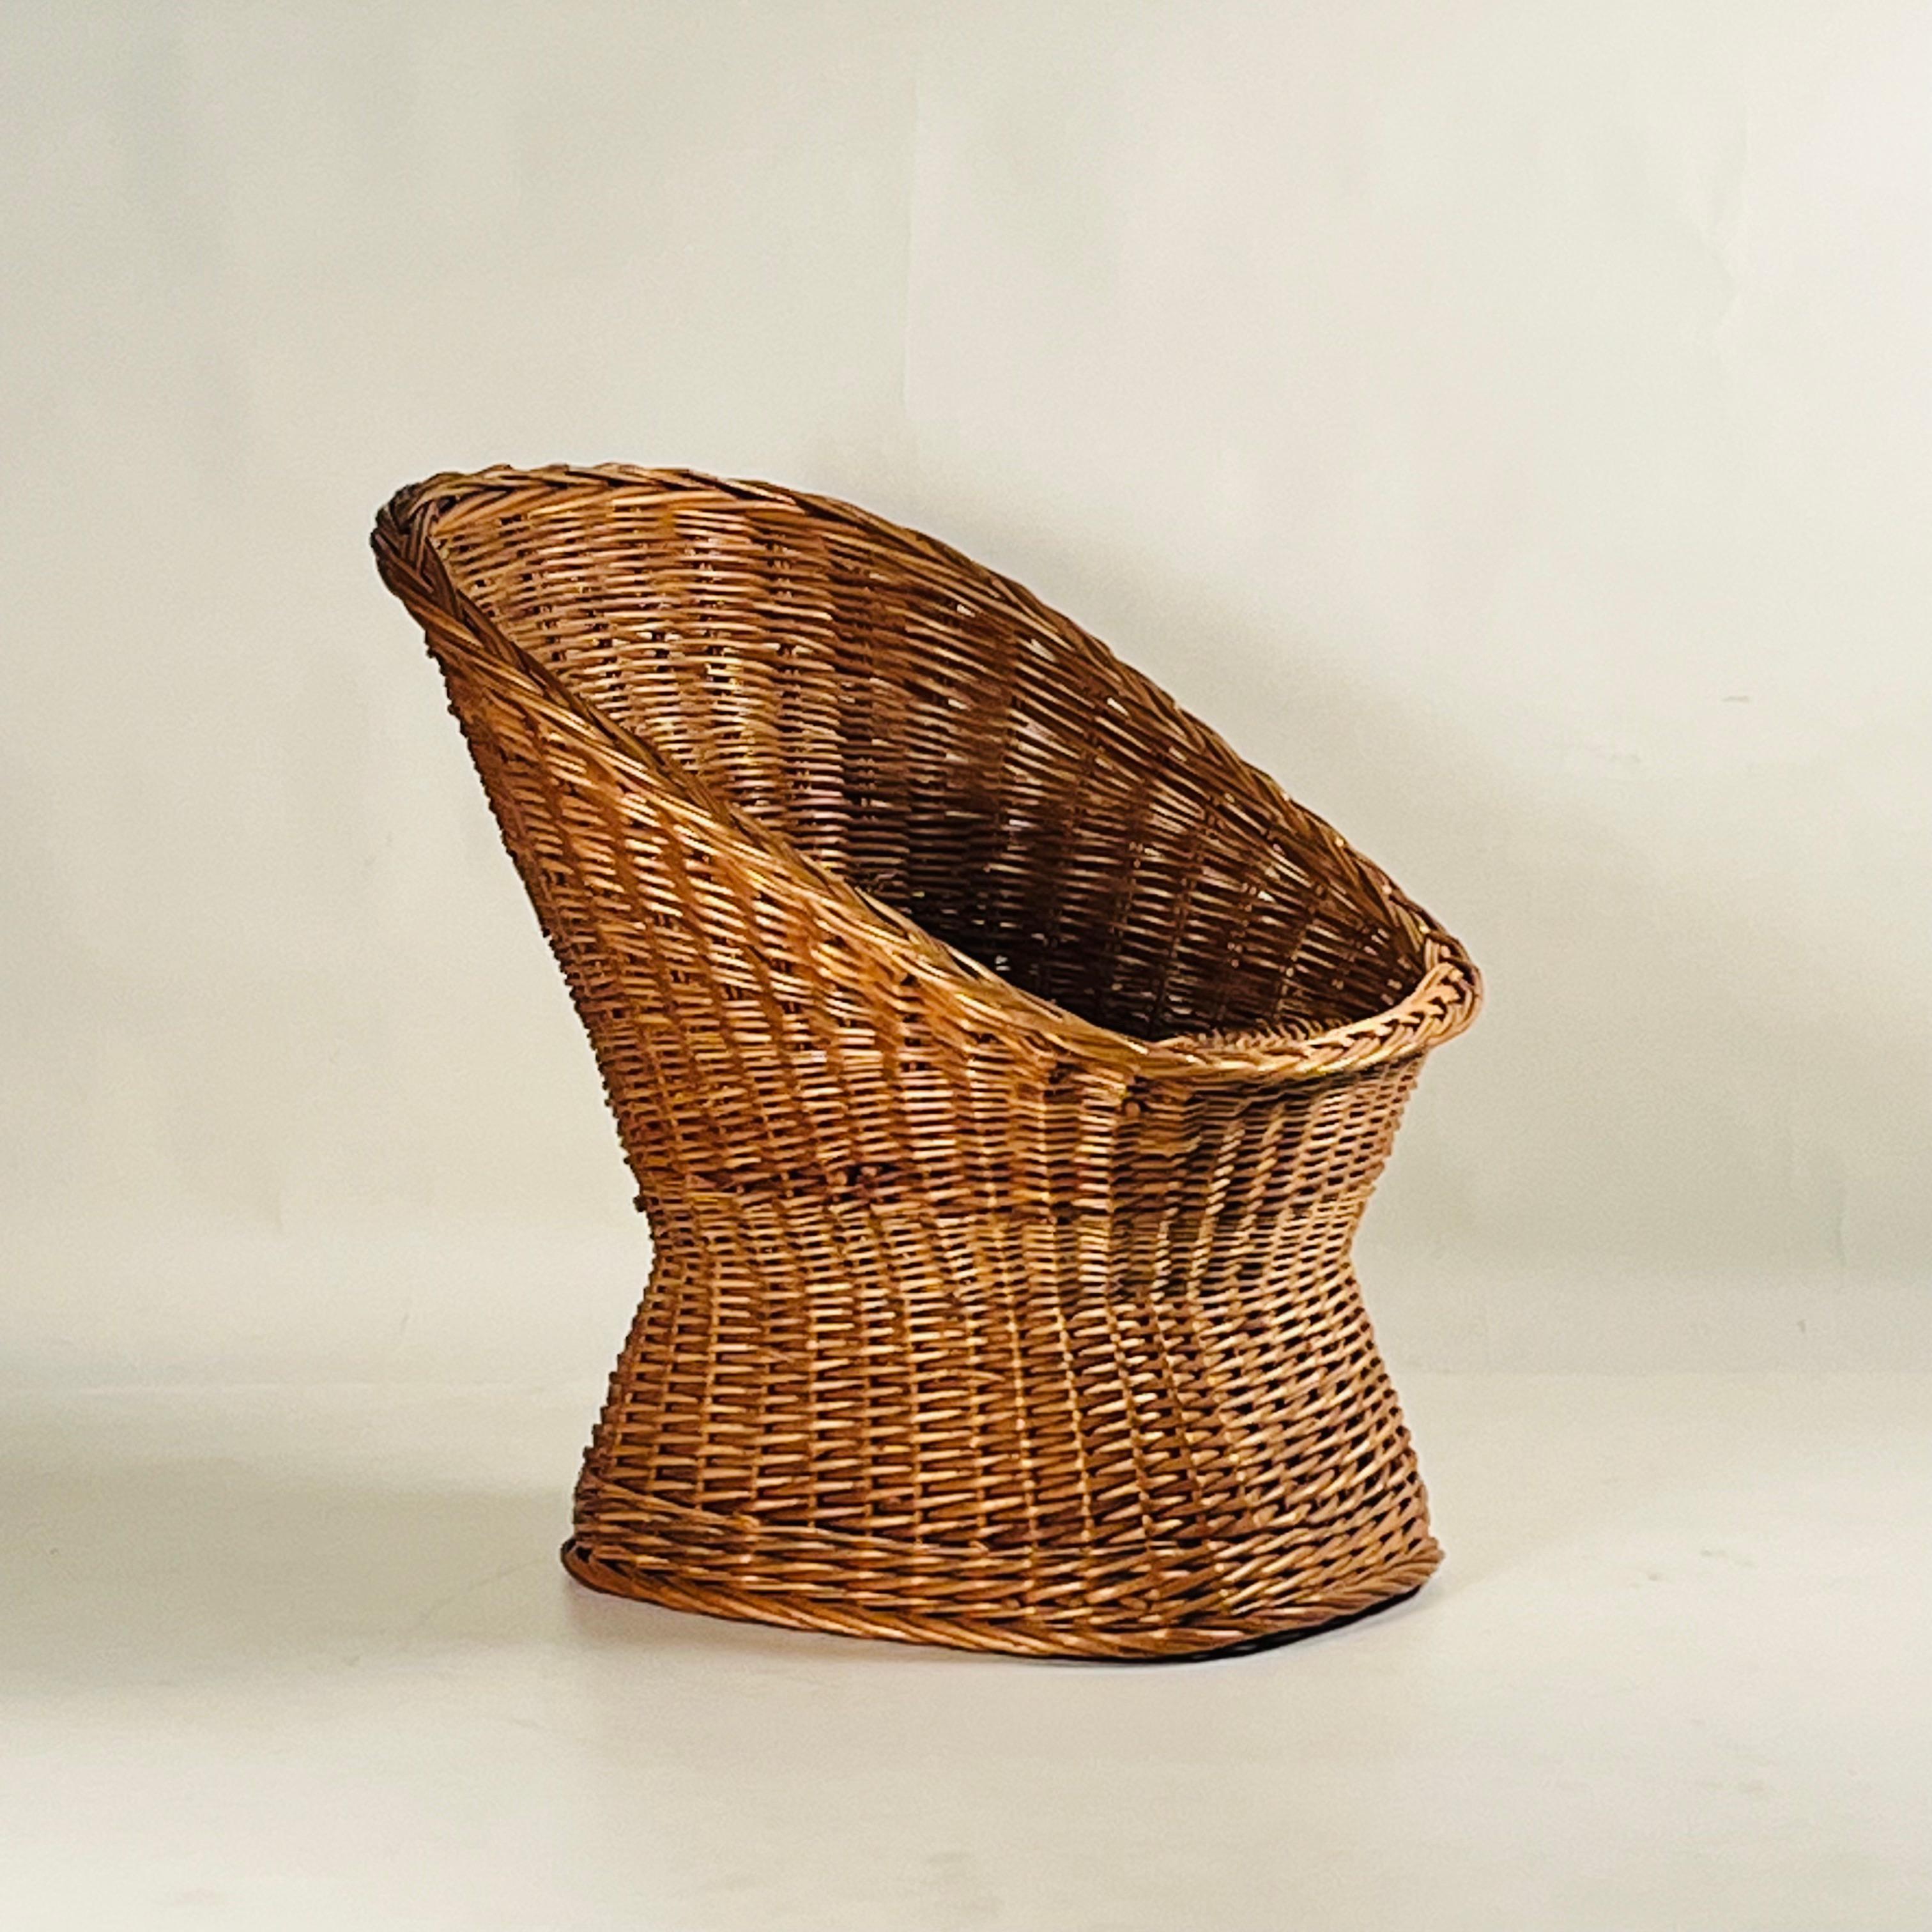 Mid-20th Century Woven Rattan Wicker Barrel Chair with Shearling Pad For Sale